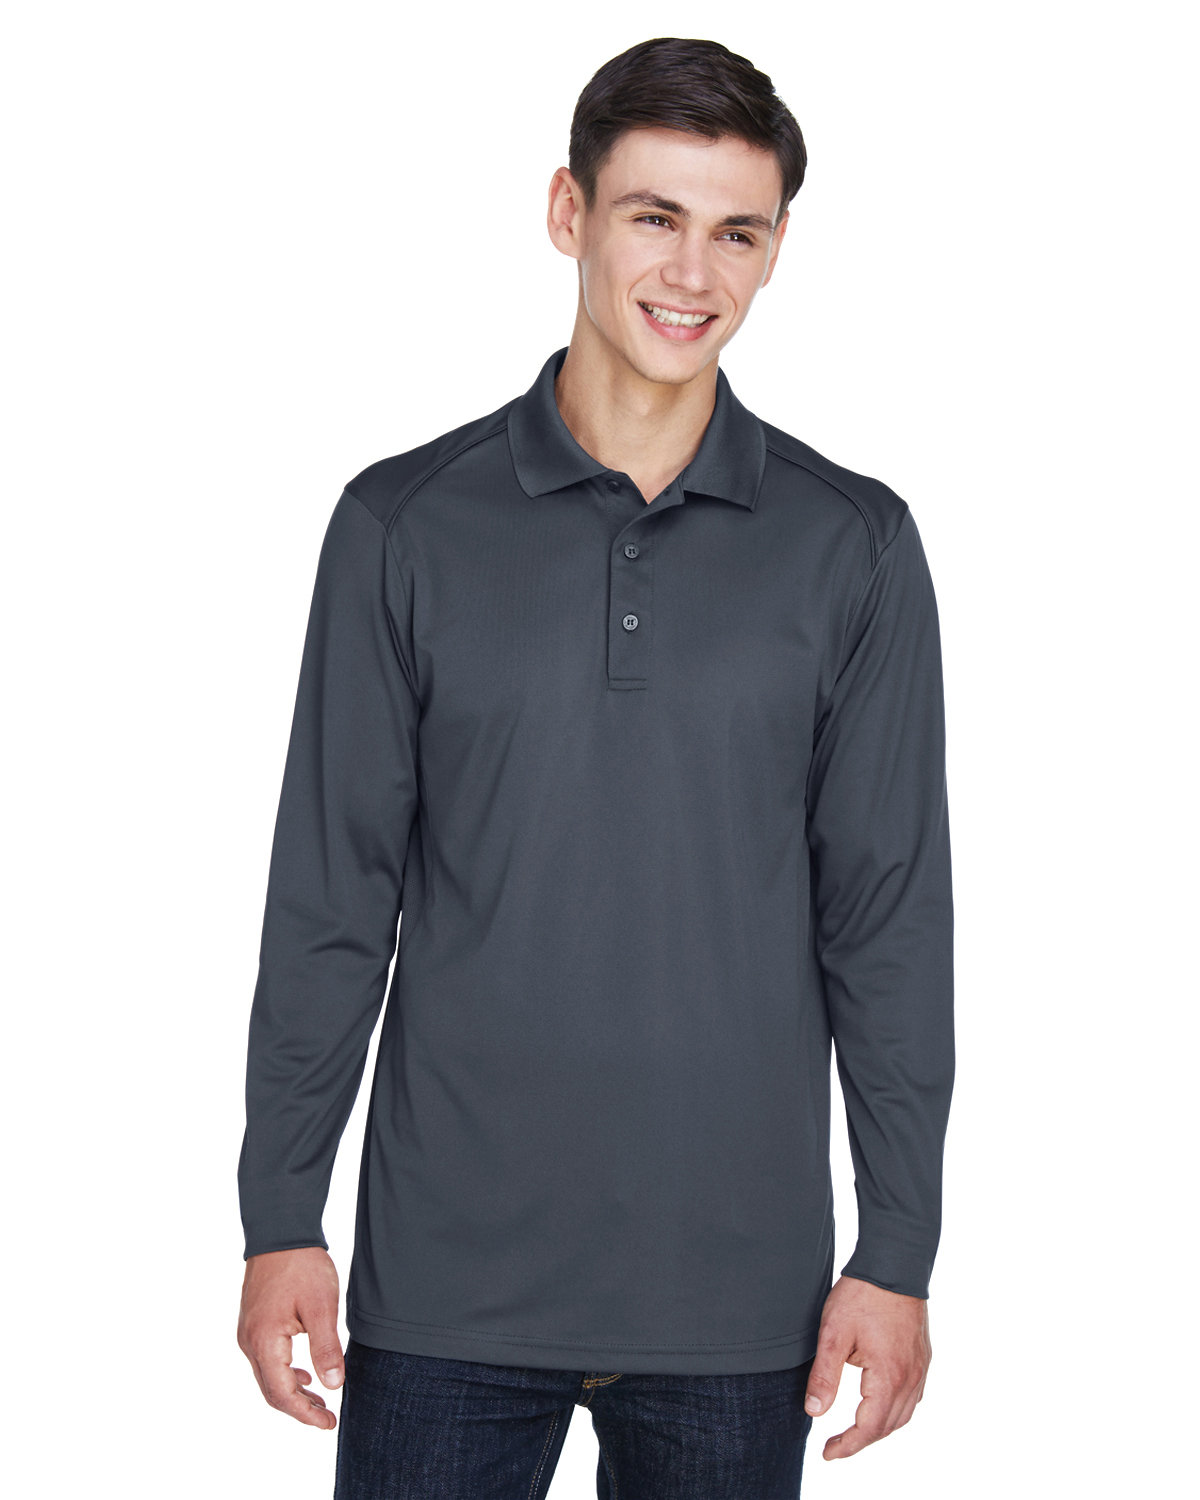 Extreme Men's Eperformance™ Snag Protection Long-Sleeve Polo CARBON 